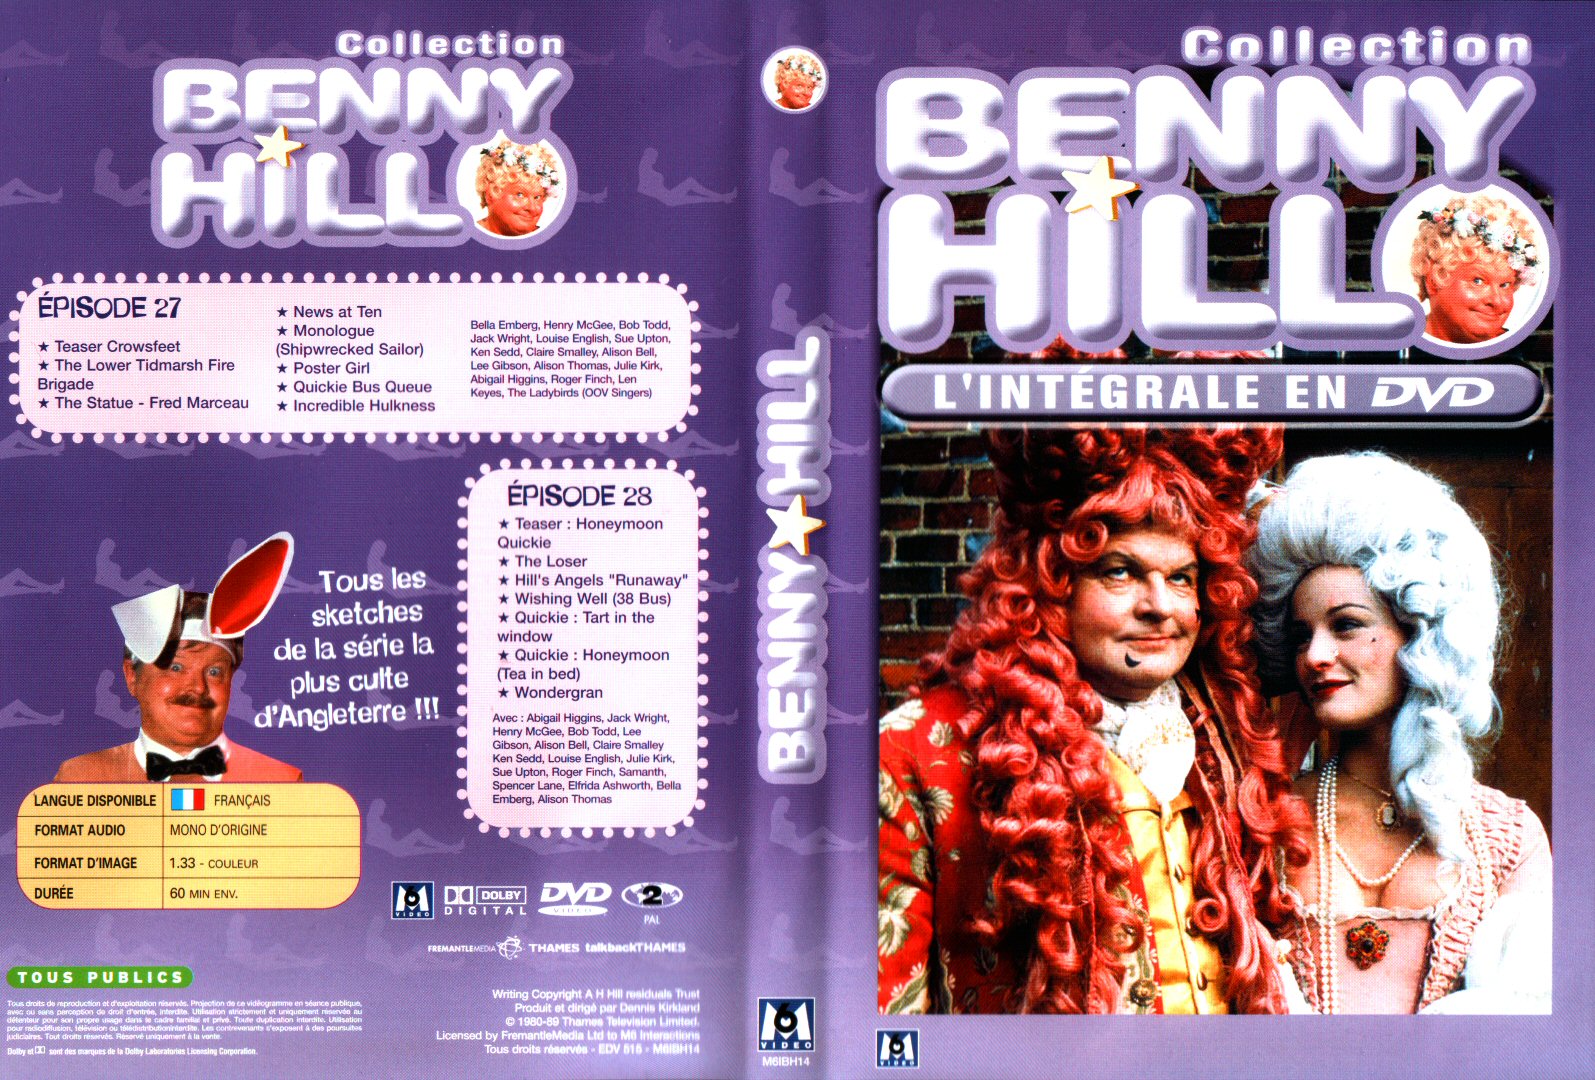 Jaquette DVD Benny Hill collection Episodes 27-28